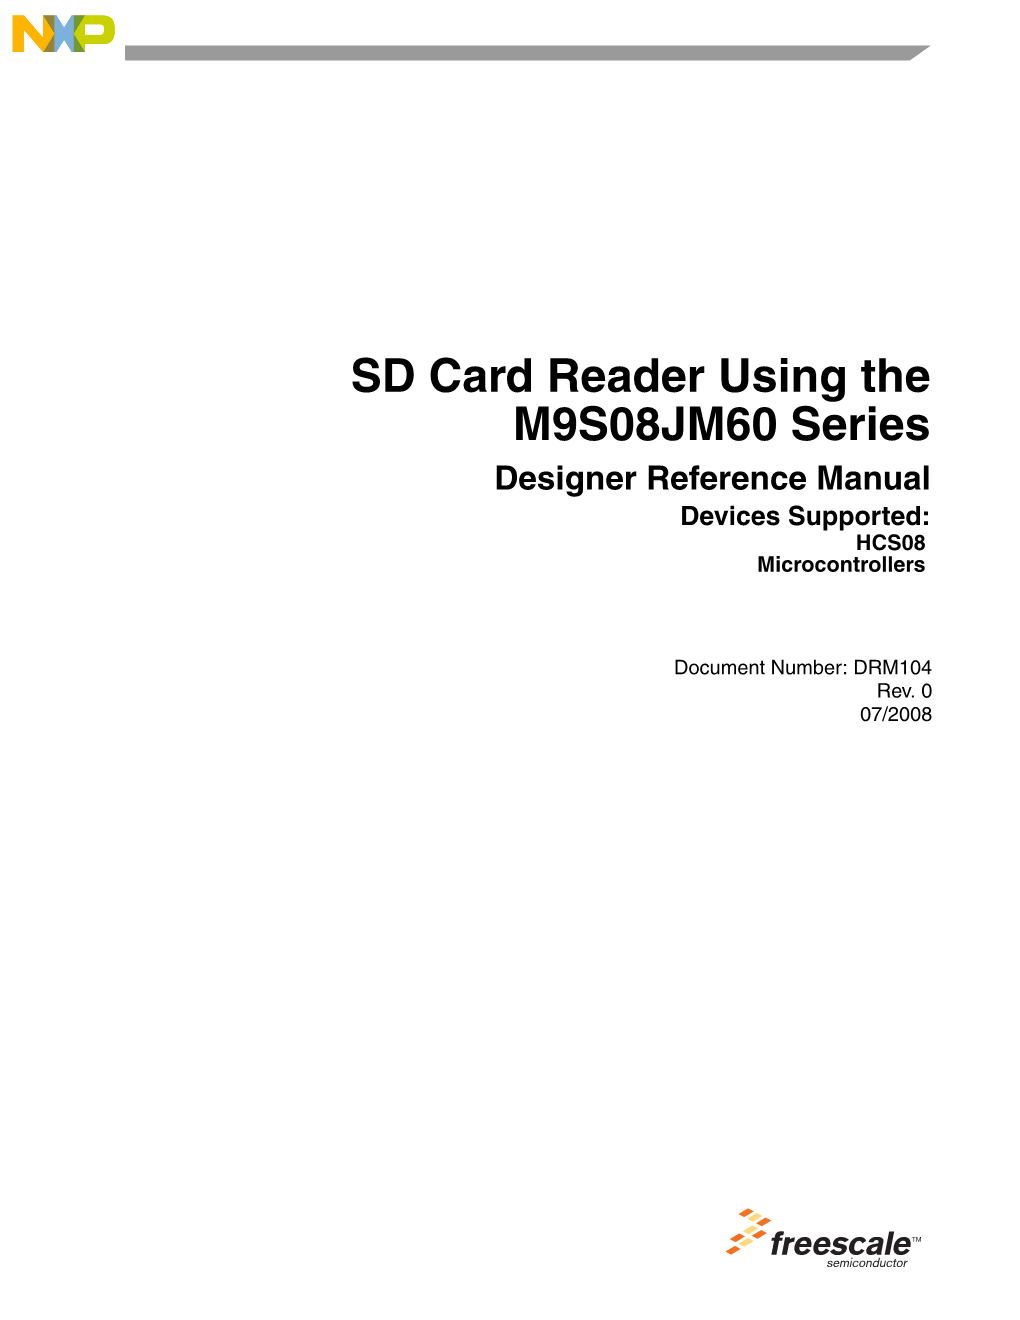 SD Card Reader Using the M9S08JM60 Series Designer Reference Manual Devices Supported: HCS08 Microcontrollers